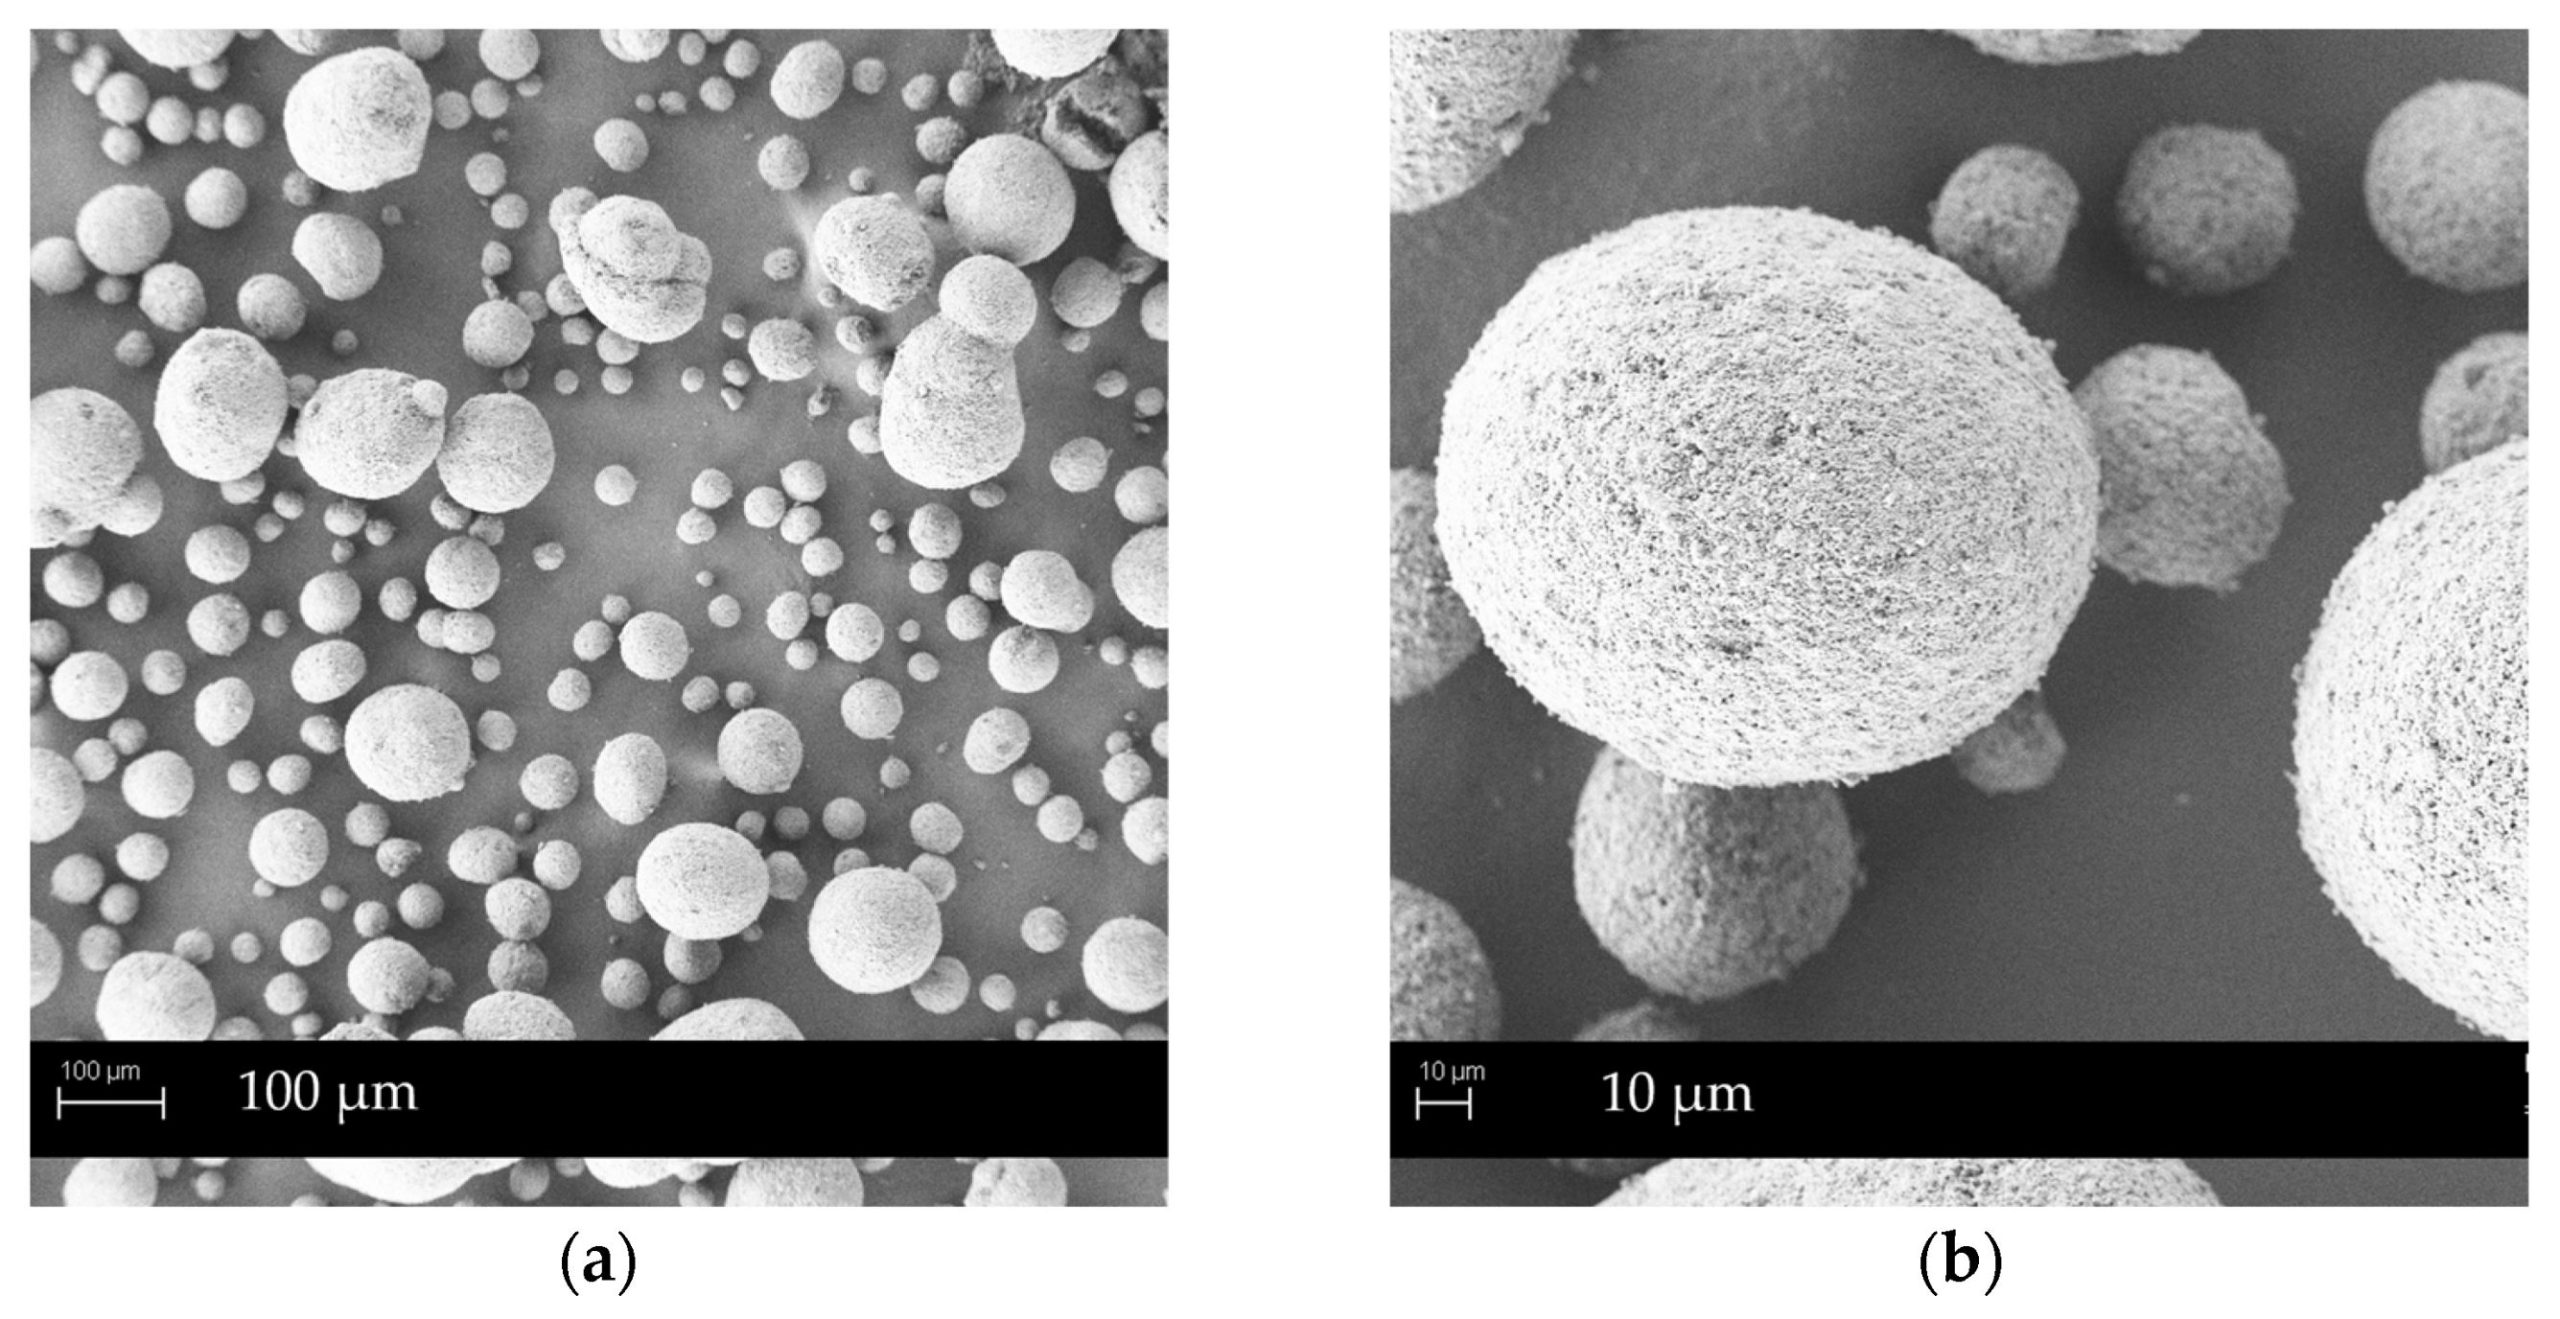 High-Shear Wet Granulation of SMEDDS Based on Mesoporous Carriers for Improved Carvedilol Solubility